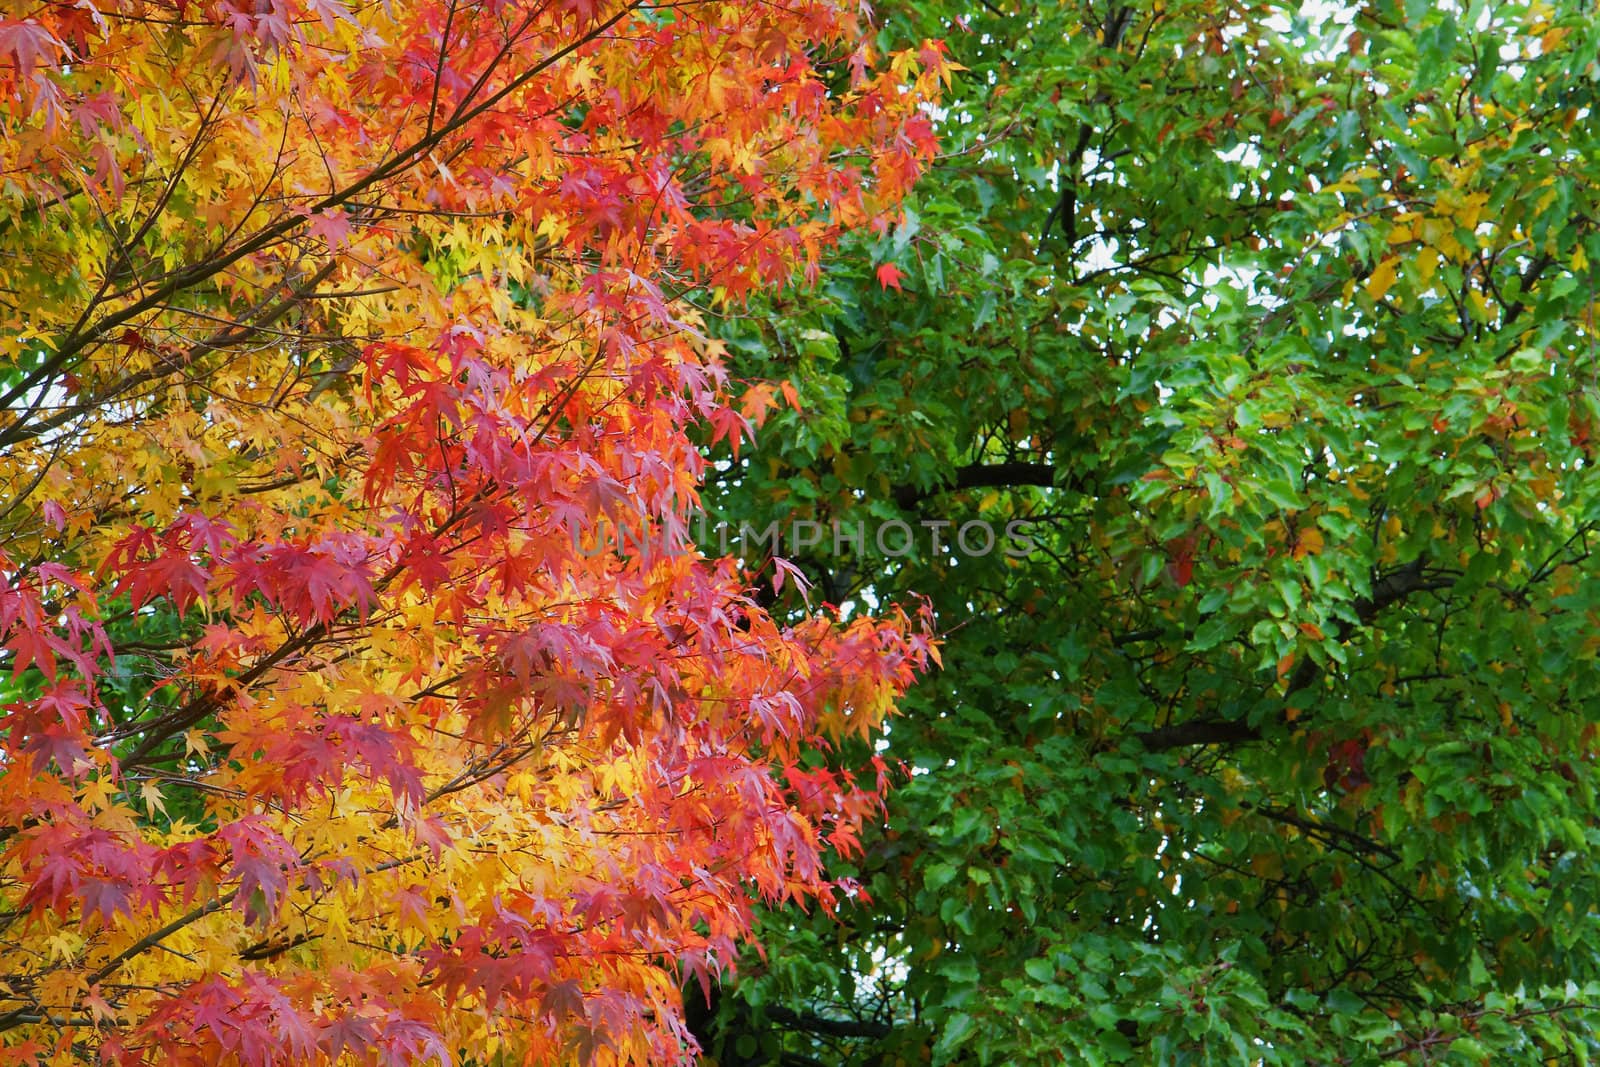 Yellow, orange, and red fall leaves contrasting against green leaves